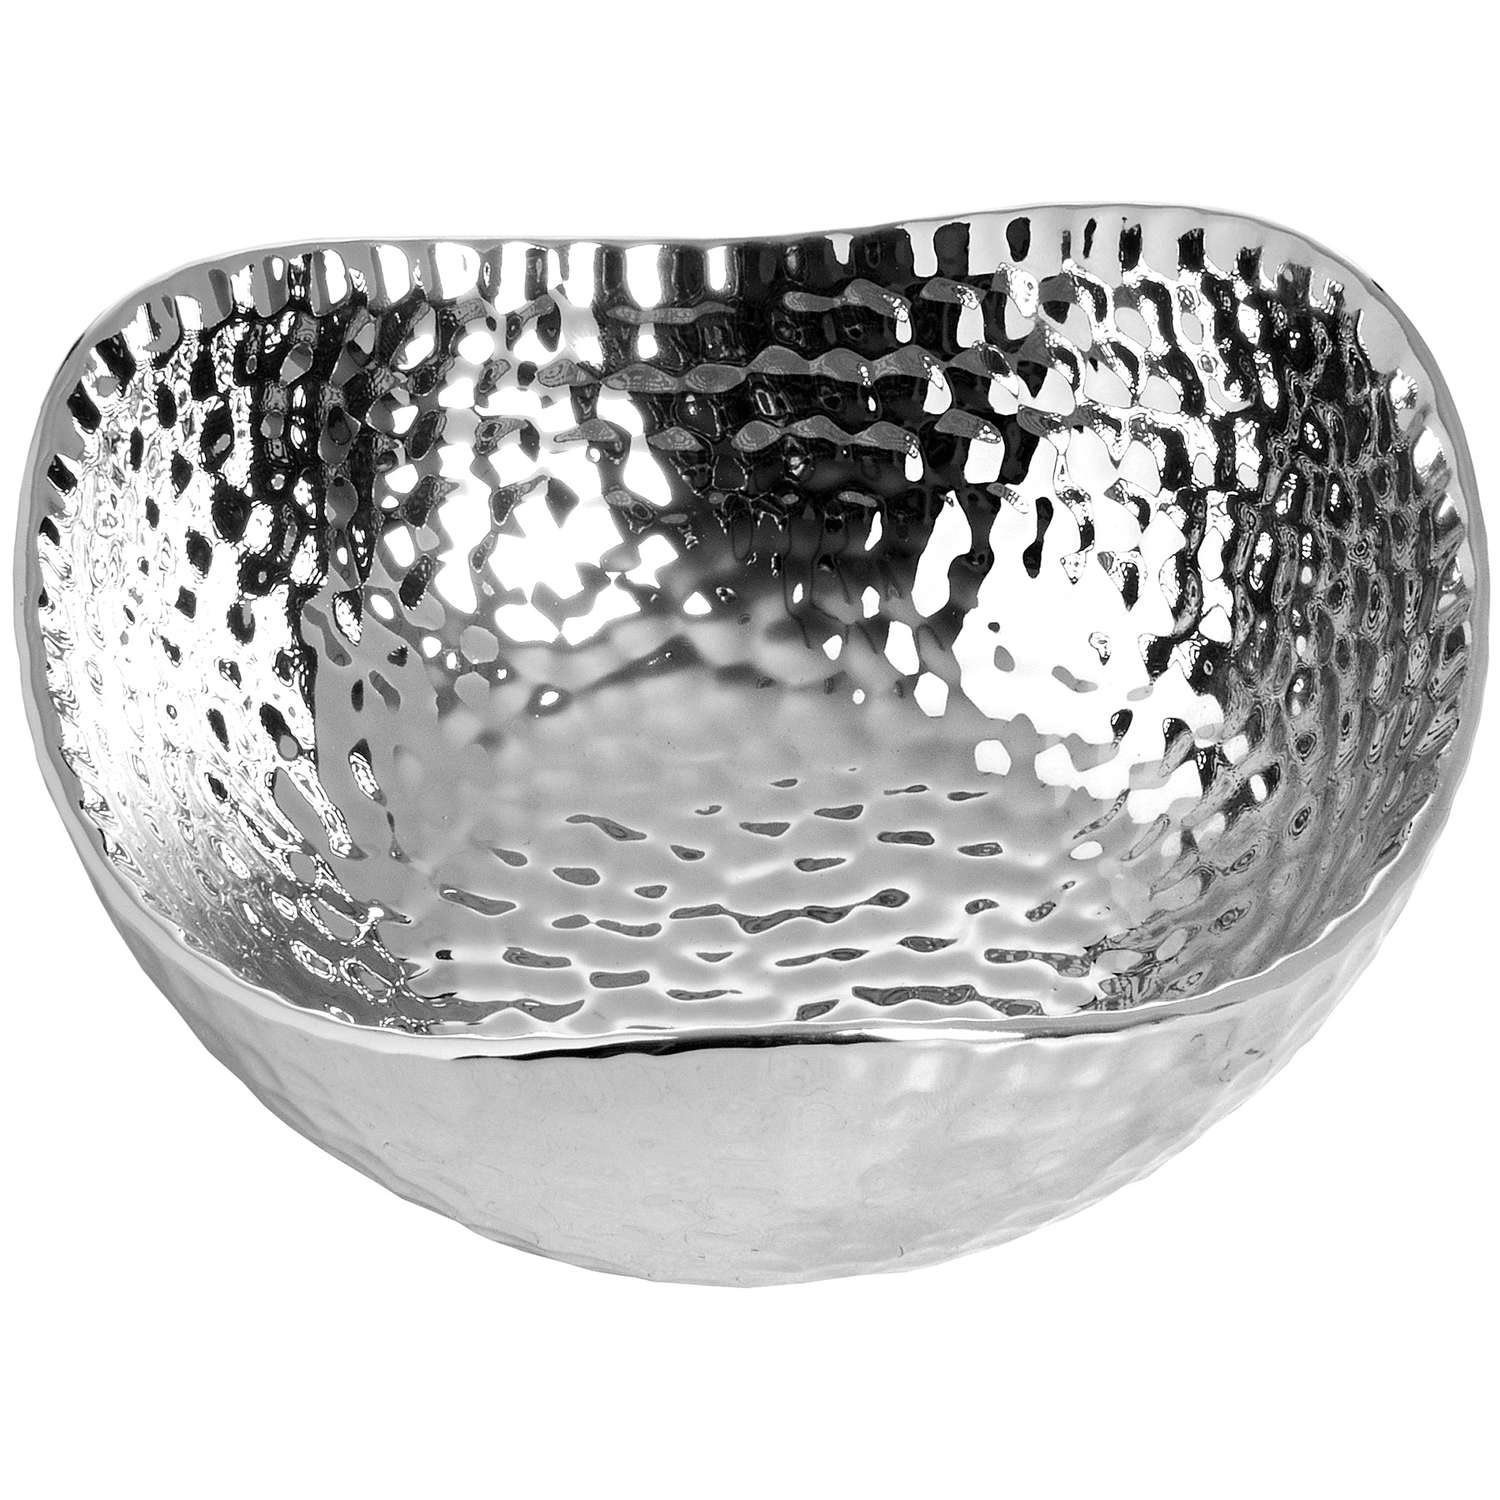 Silver Ceramic Dimple Effect Display Bowl - Small - Image 2